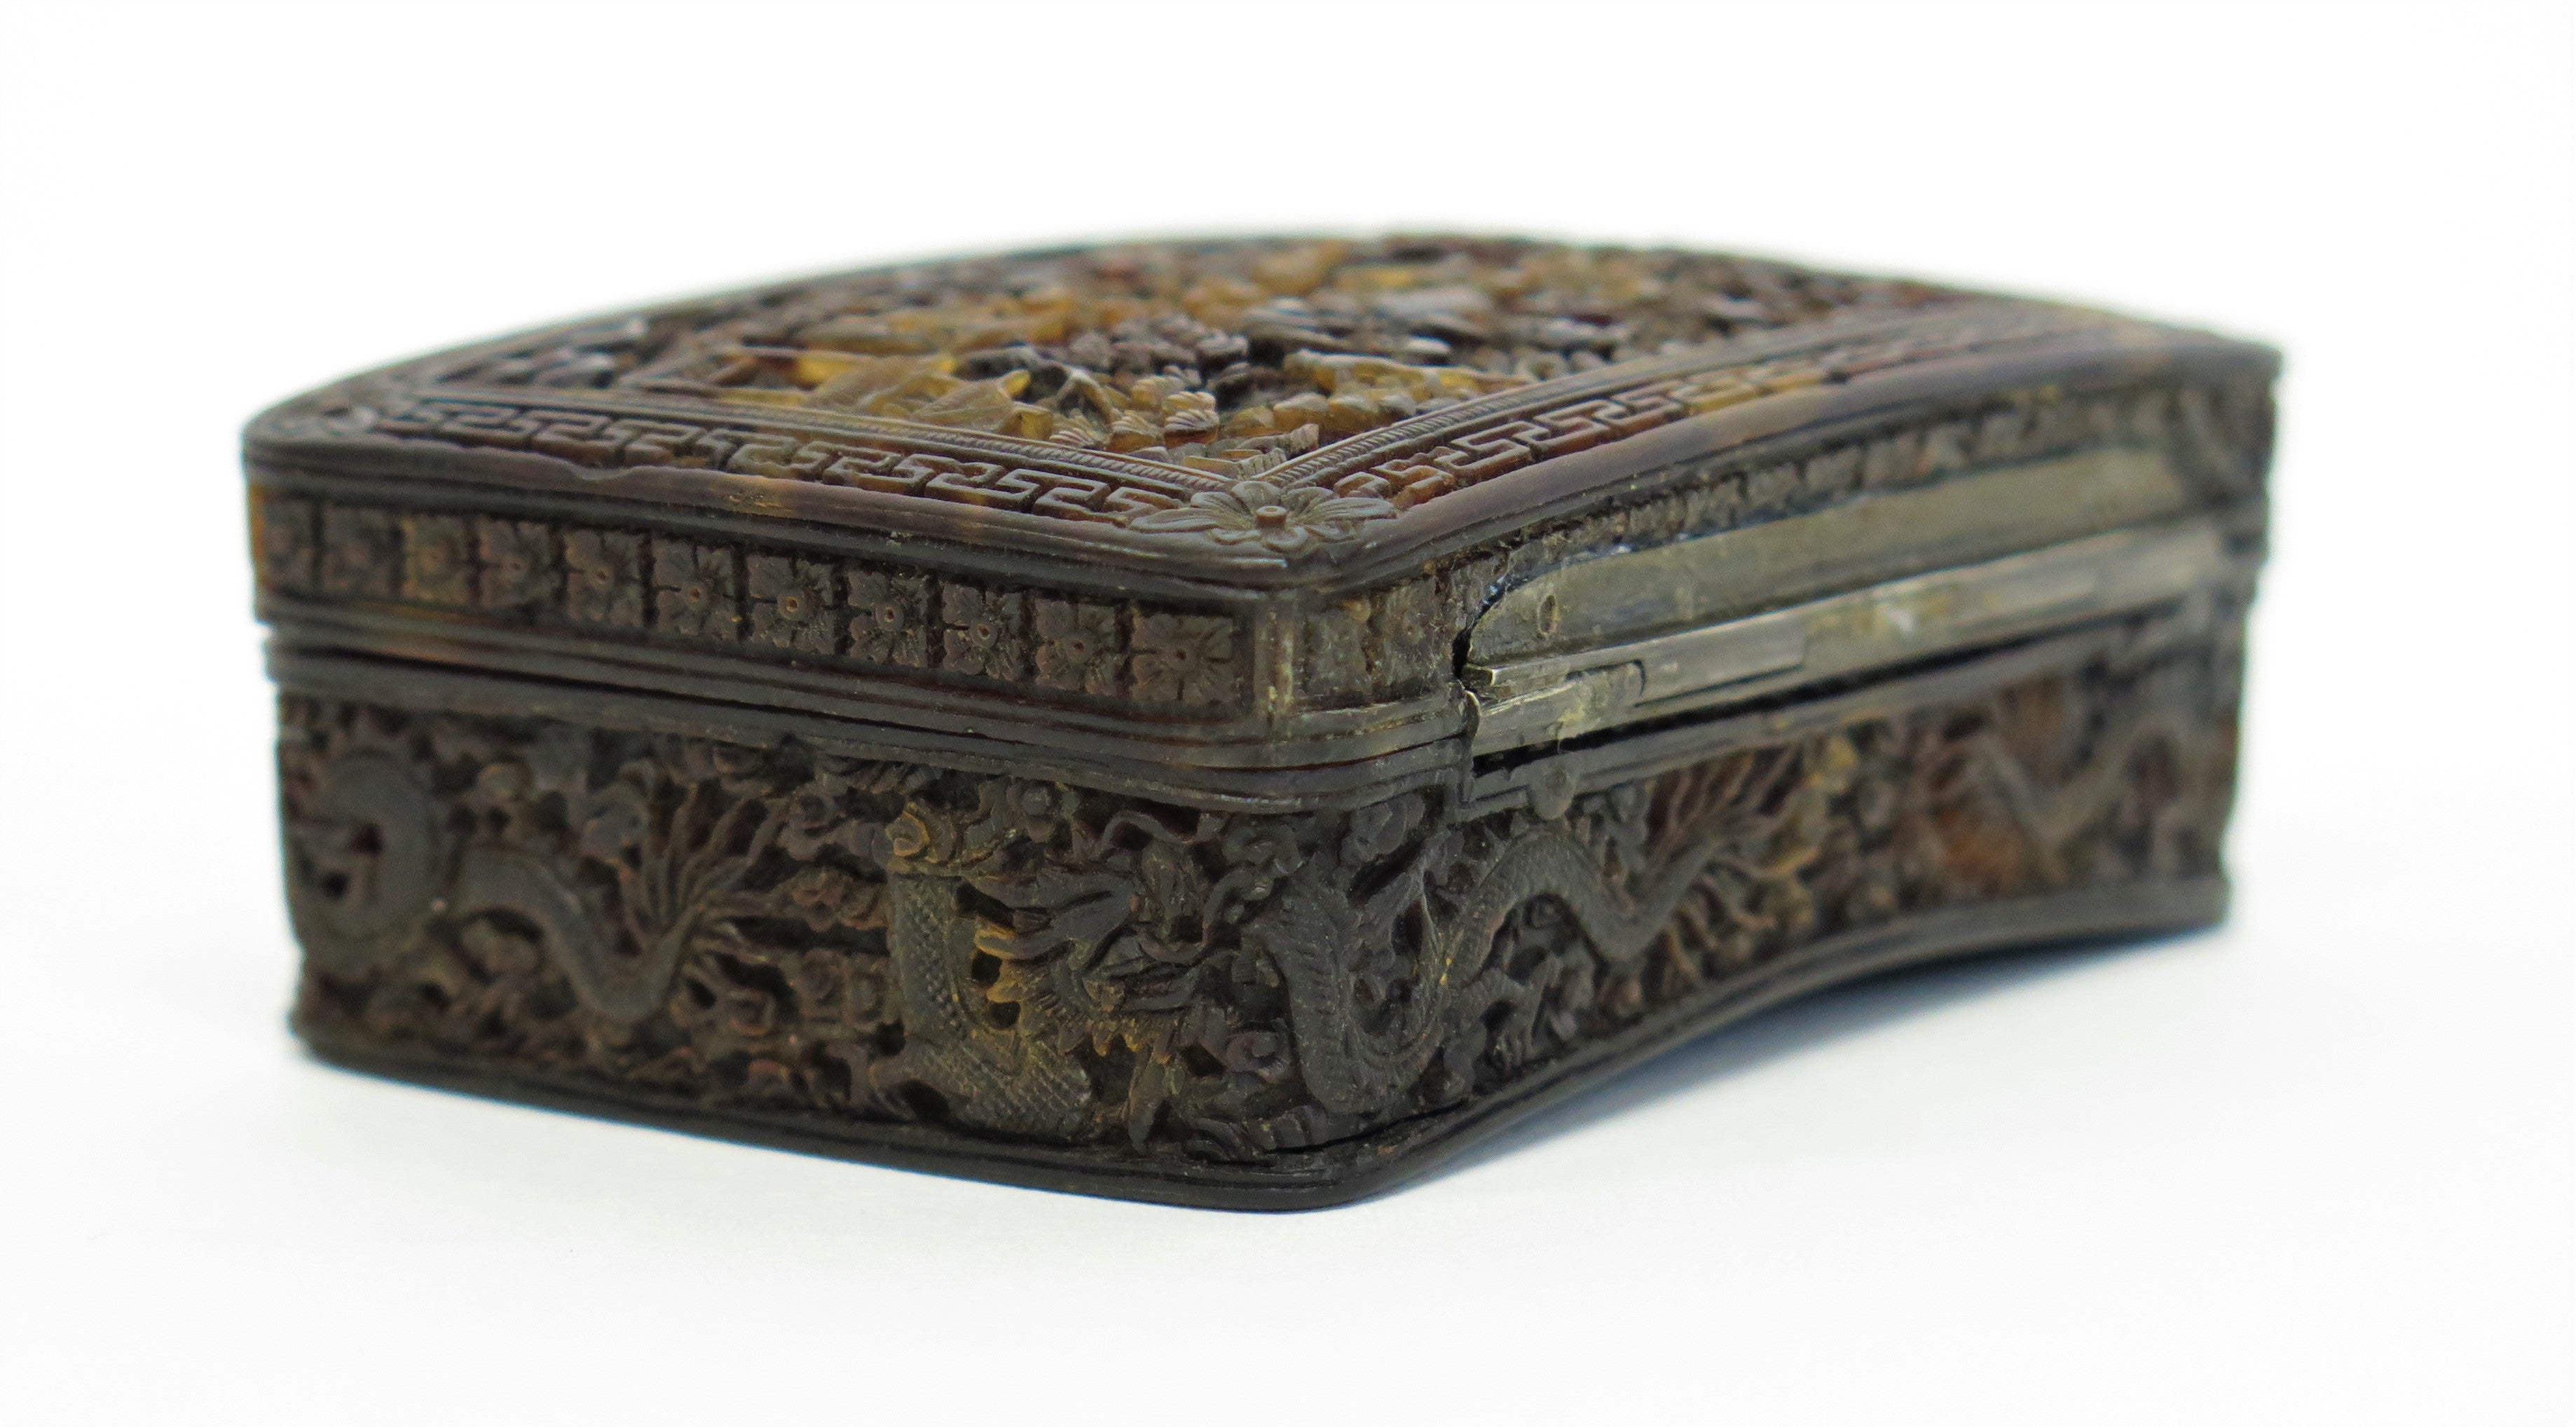 Exquisitely Carved Tortoise Shell Box with Cipher / Monogram